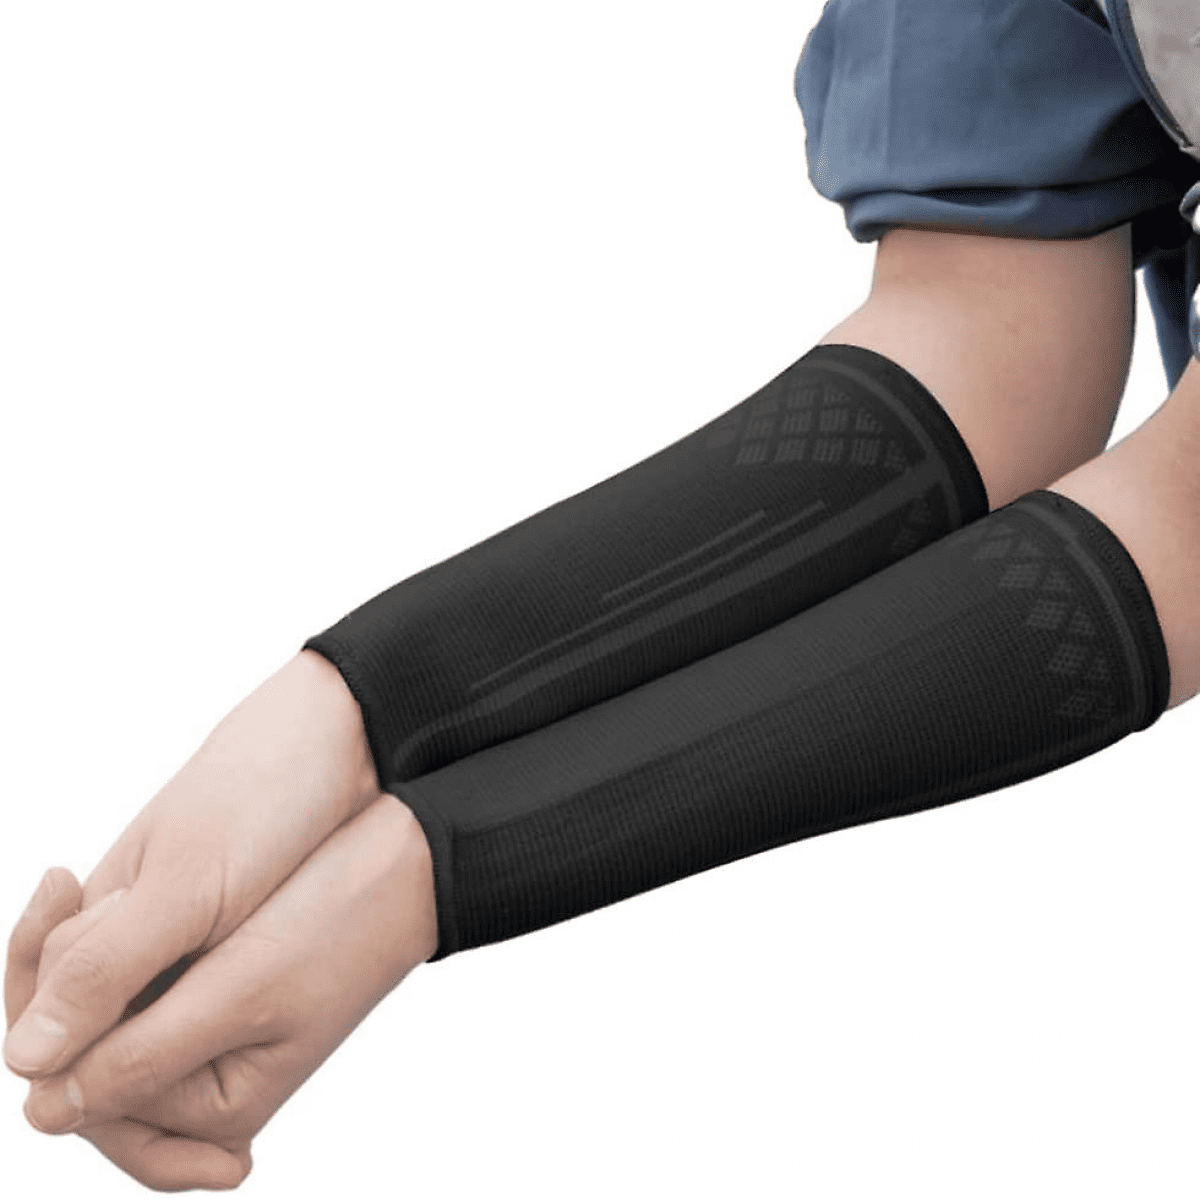  RGA Padded Arm Sleeve Compression Basketball Arm Sleeve Elbow  Pad Sold as Single : Clothing, Shoes & Jewelry